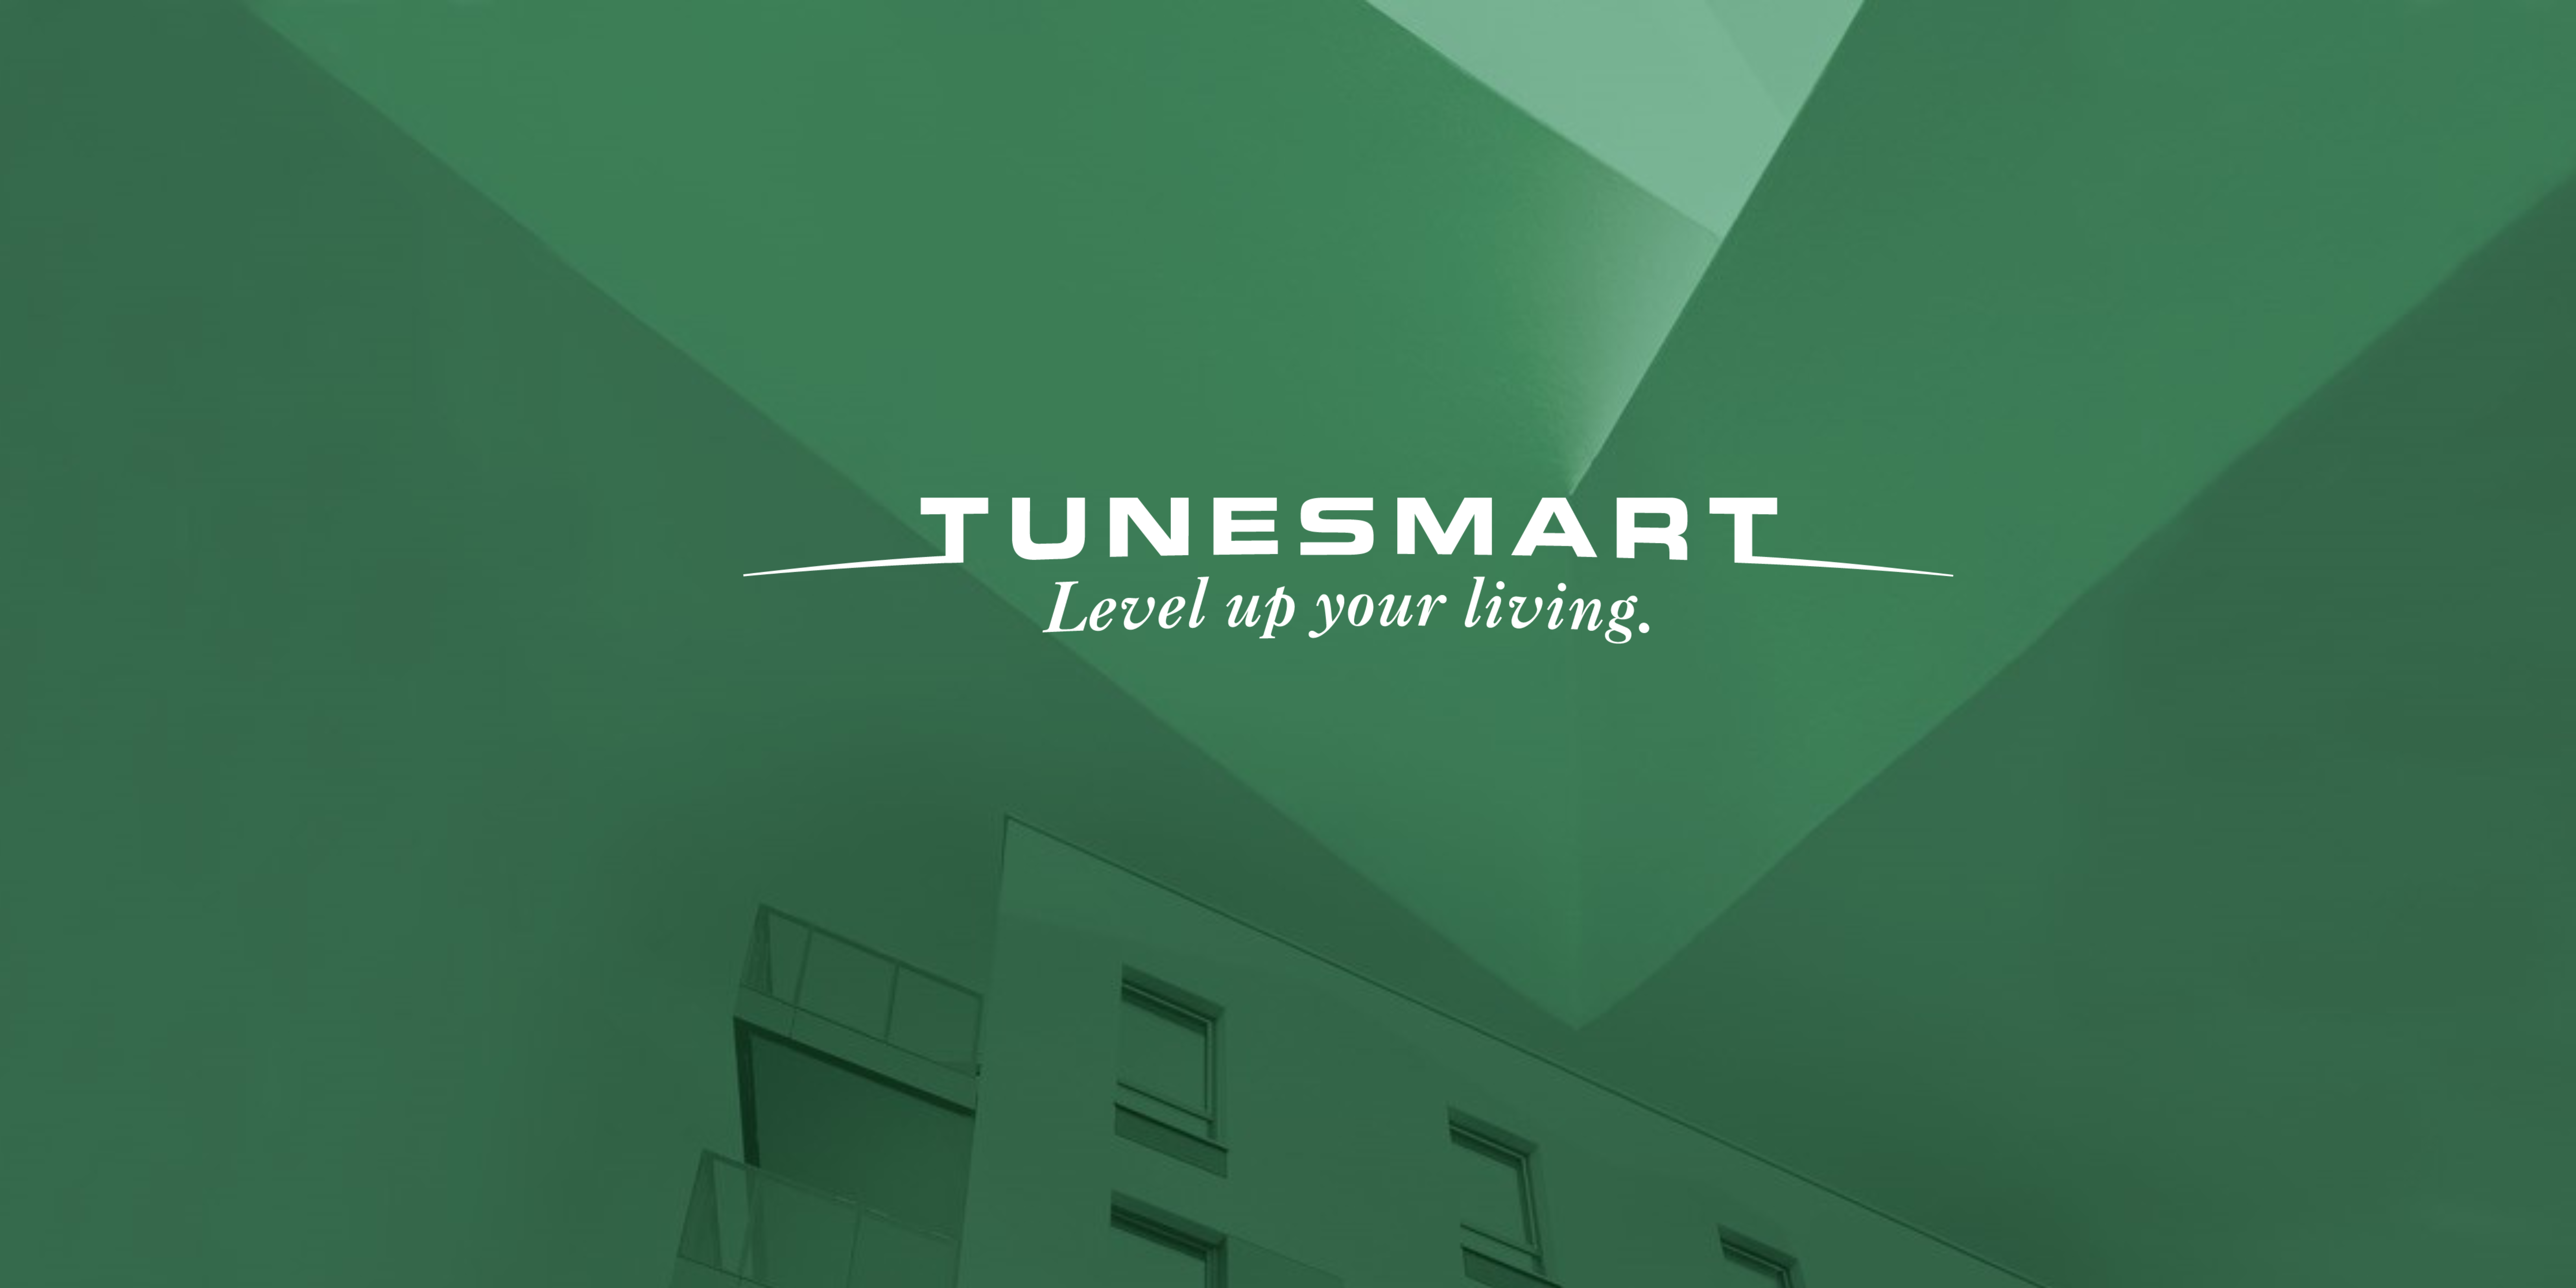 Tunesmart Level up your living-1